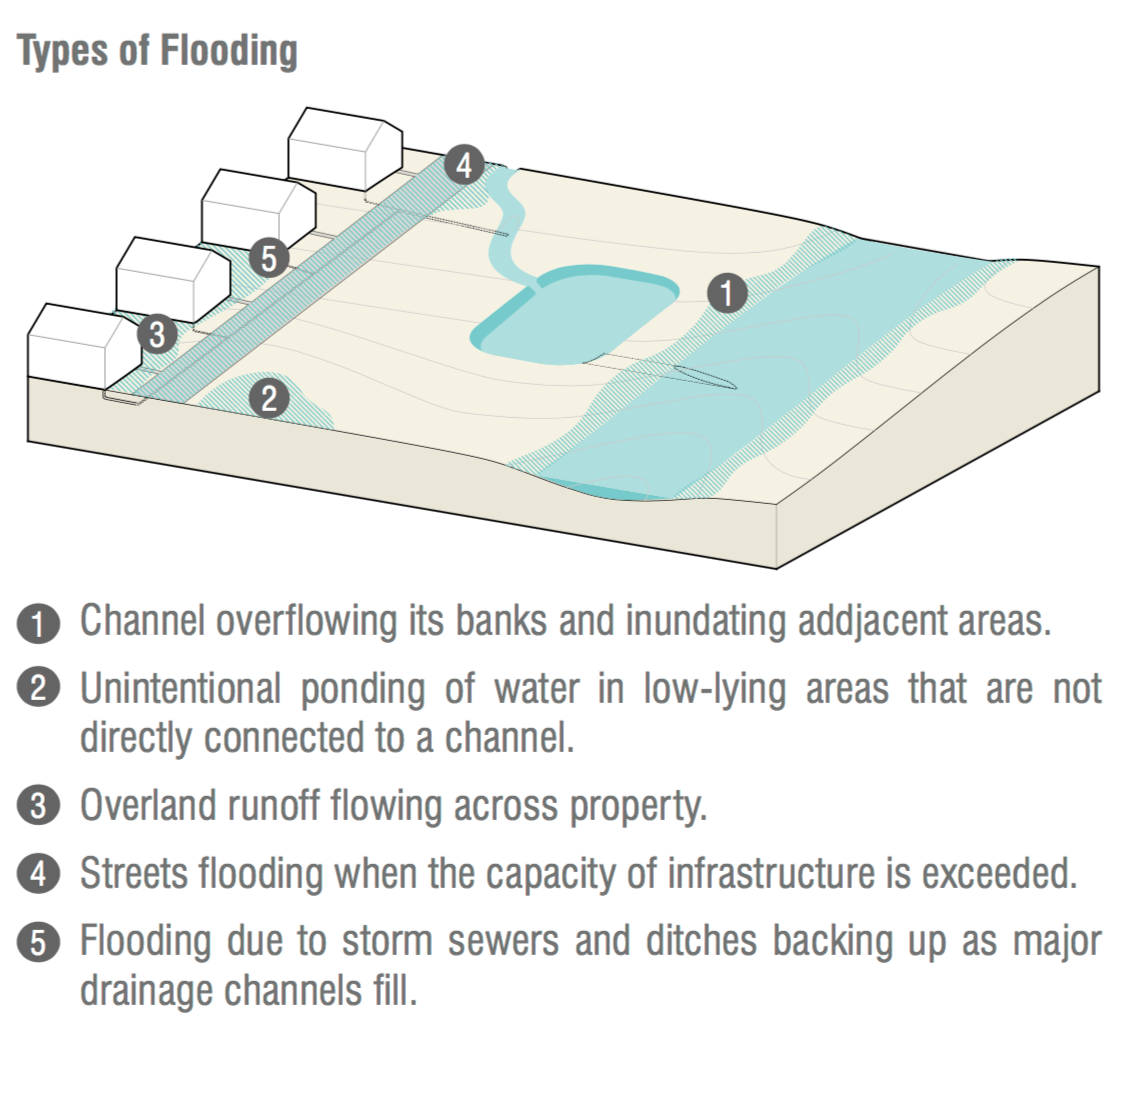 Types of flooding graphic